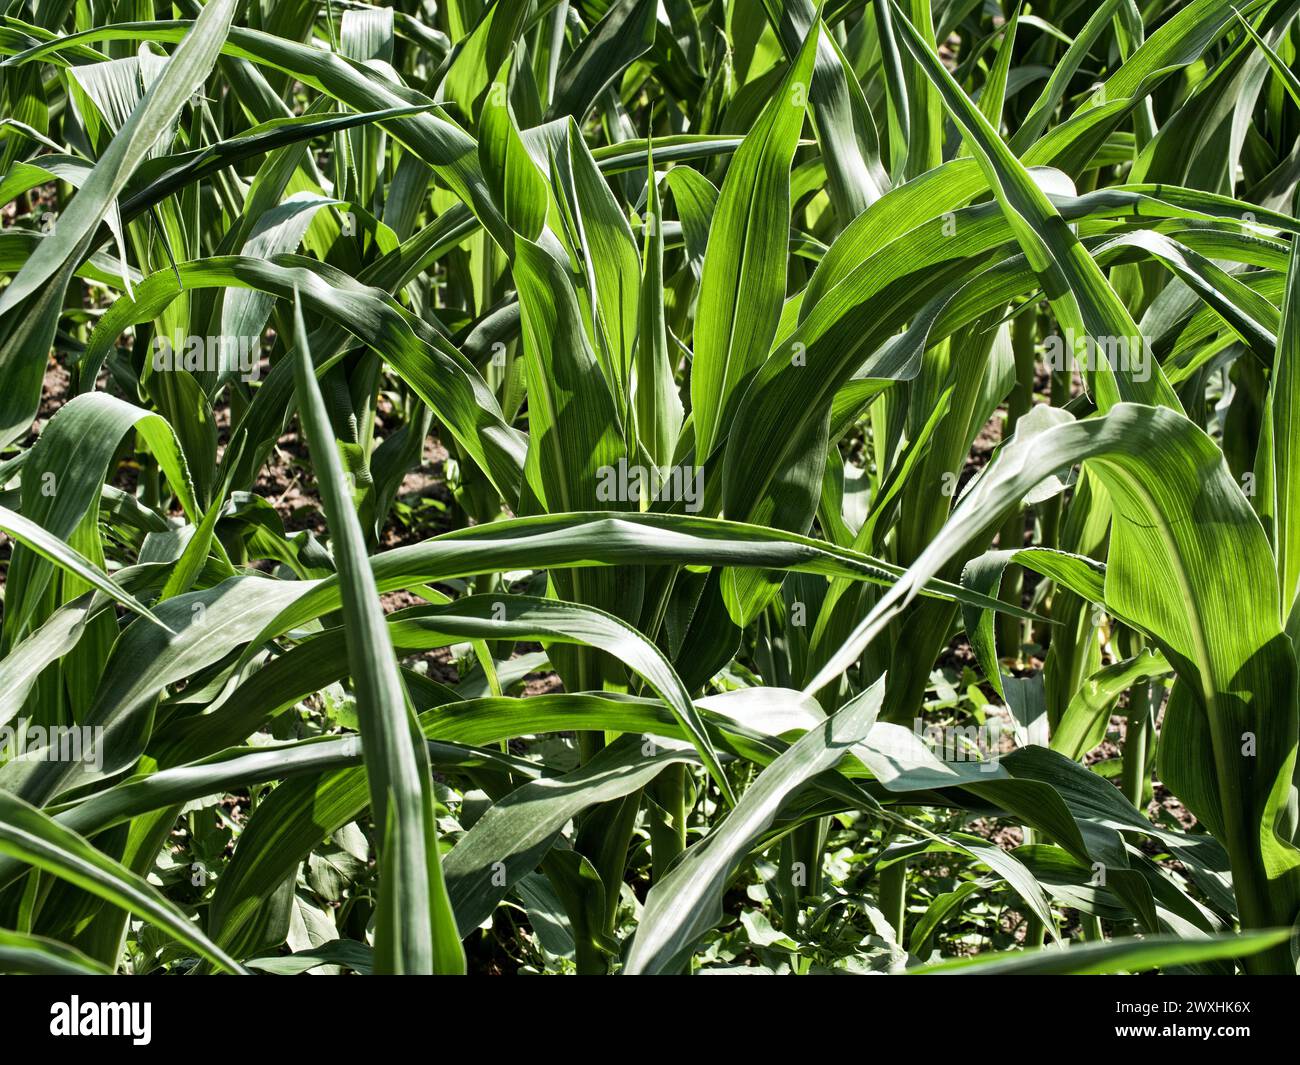 Healthy Corn Plants: A detailed view of corn plants’ green leaves under bright sunlight, indicating healthy growth. Stock Photo